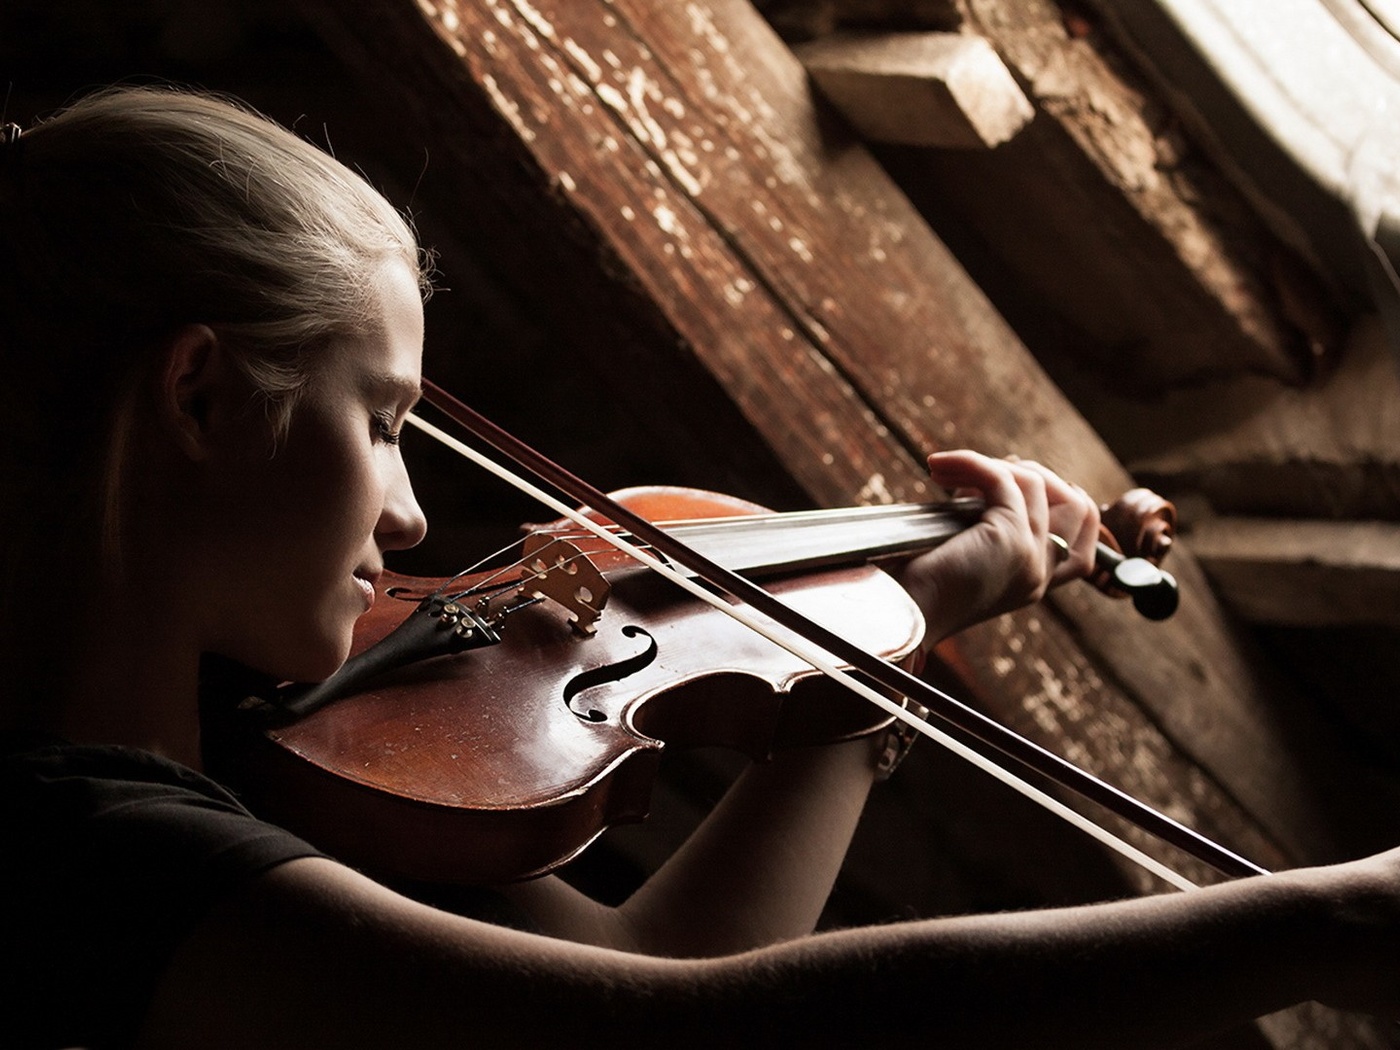 Download Wallpaper Girl playing the violin (1400x1050). The Wallpaper, photo